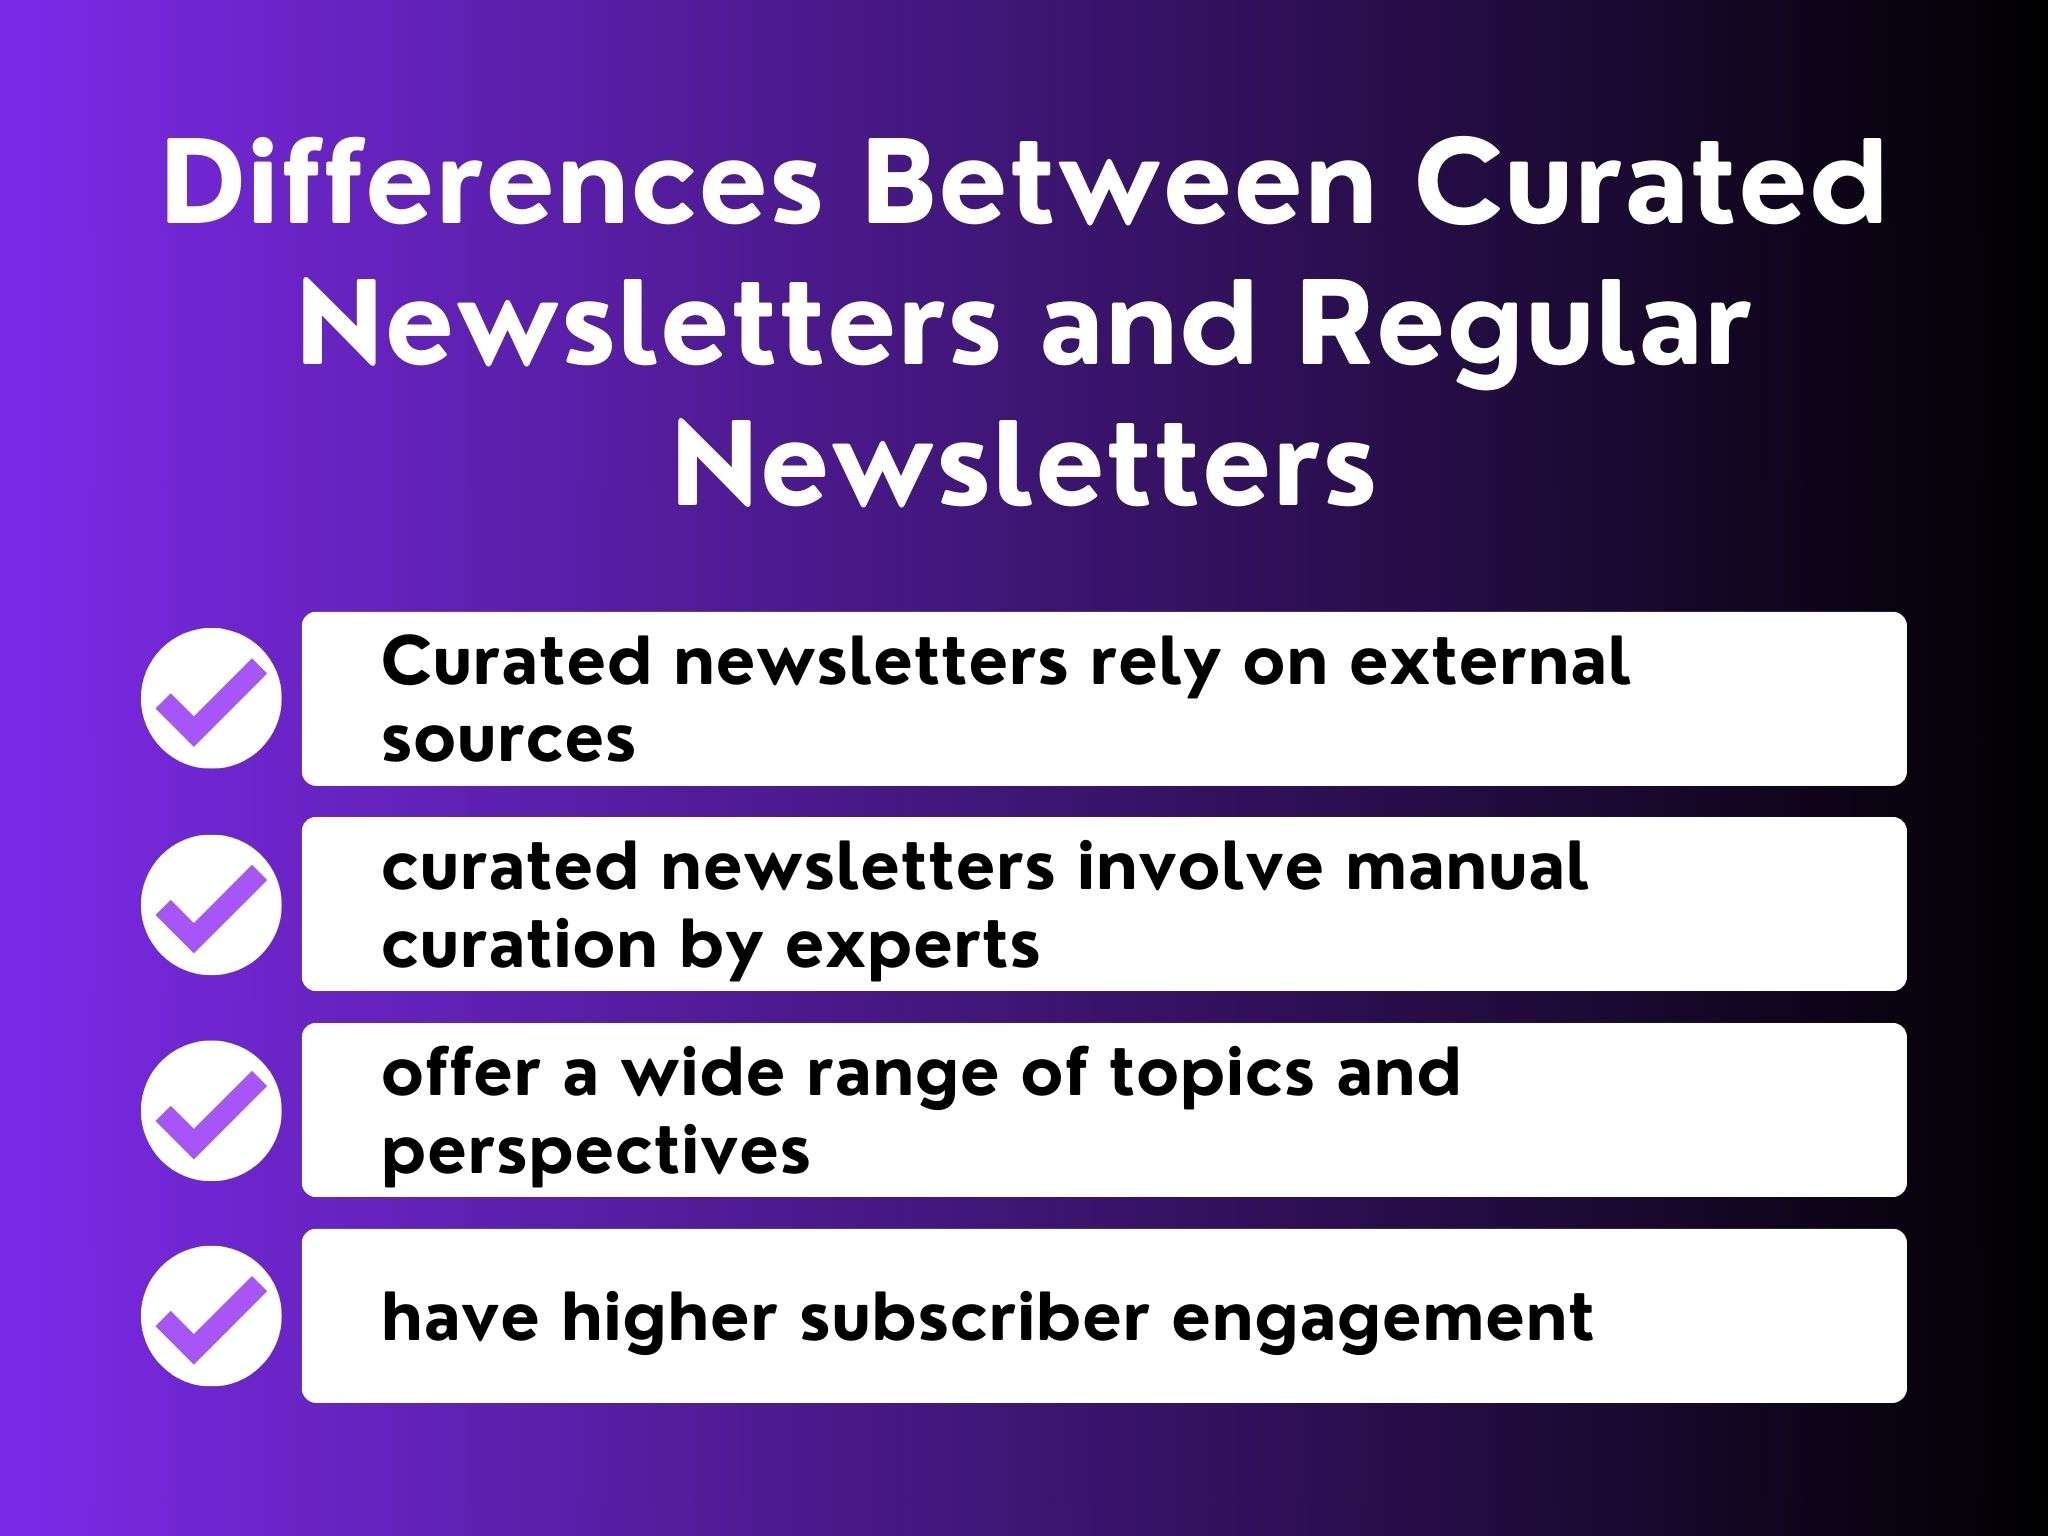 Differences between Curated Newsletters and Regular Newsletters